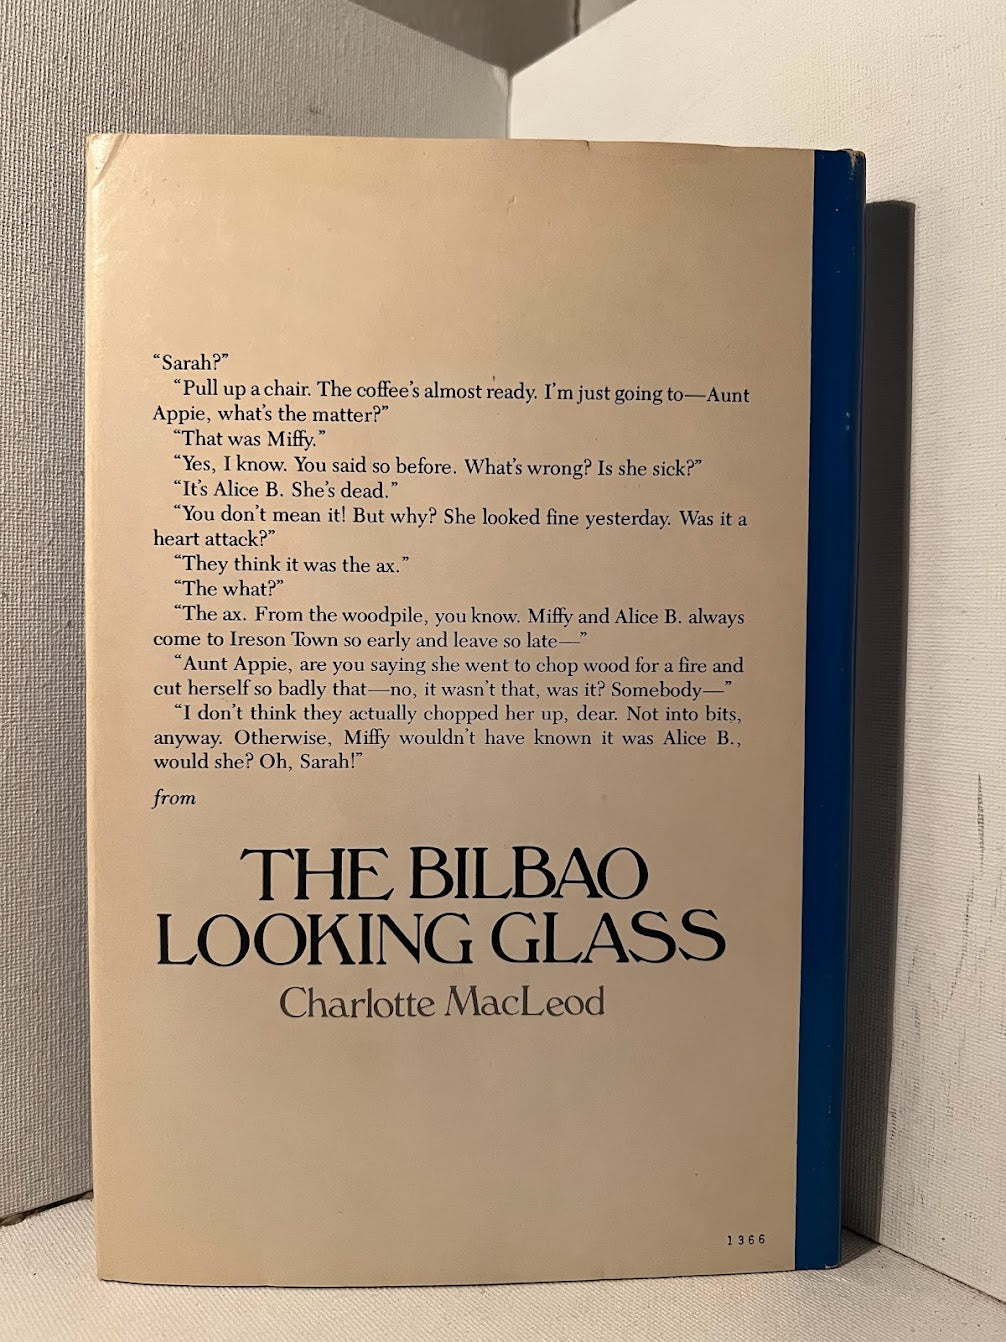 The Bilbao Looking Glass by Charlotte MacLeod